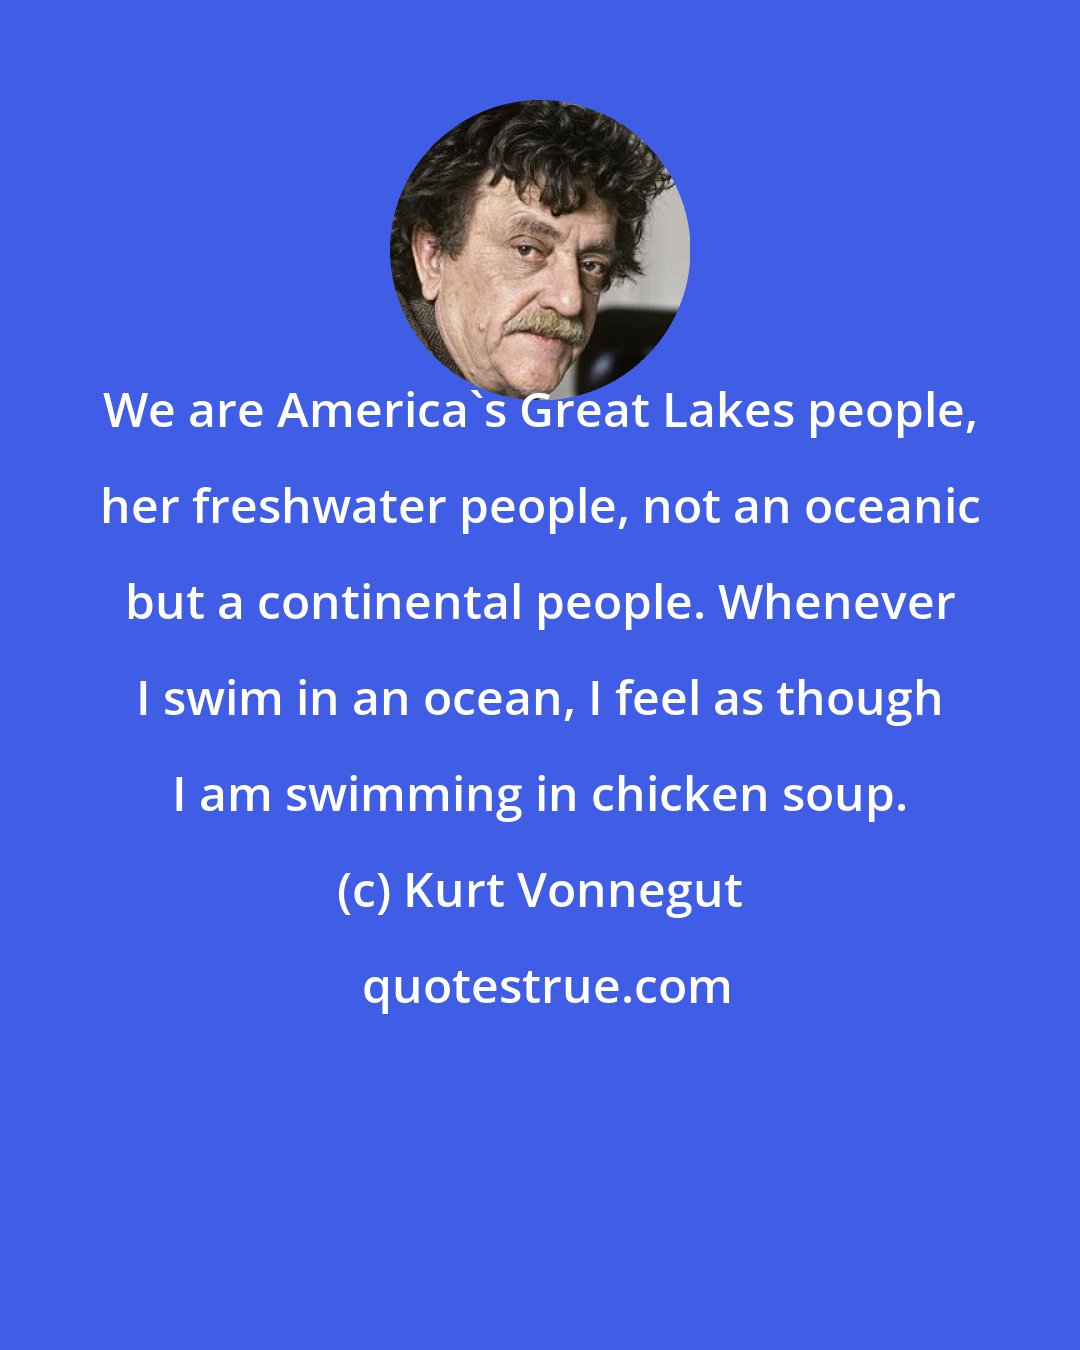 Kurt Vonnegut: We are America's Great Lakes people, her freshwater people, not an oceanic but a continental people. Whenever I swim in an ocean, I feel as though I am swimming in chicken soup.